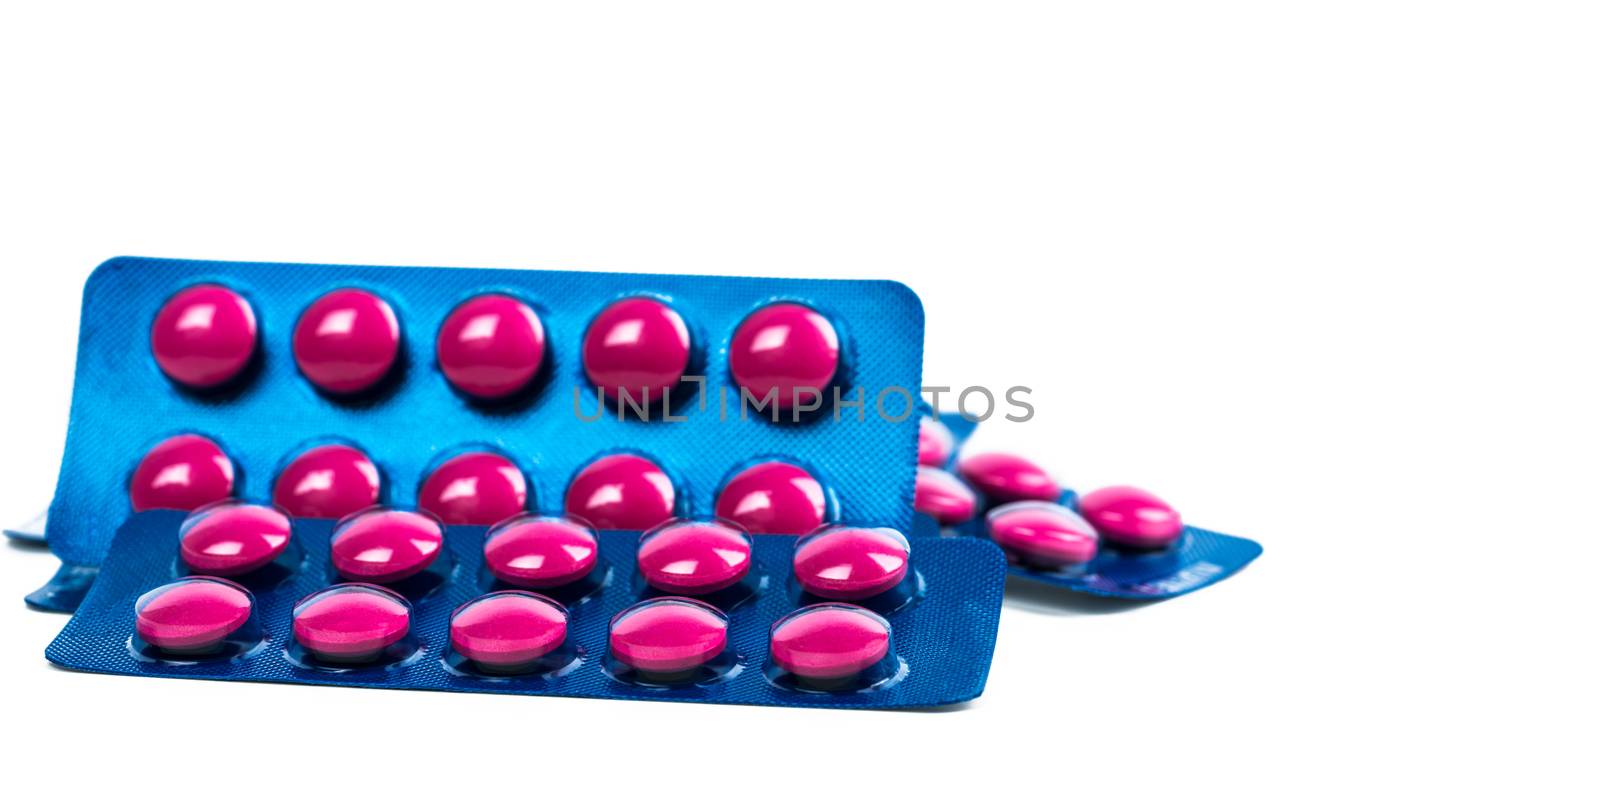 Ibuprofen in pink tablet pills pack in blue blister pack isolated on white background with copy space. Ibuprofen for relief pain, headache, high fever and anti-inflammatory. Painkiller tablets pills.